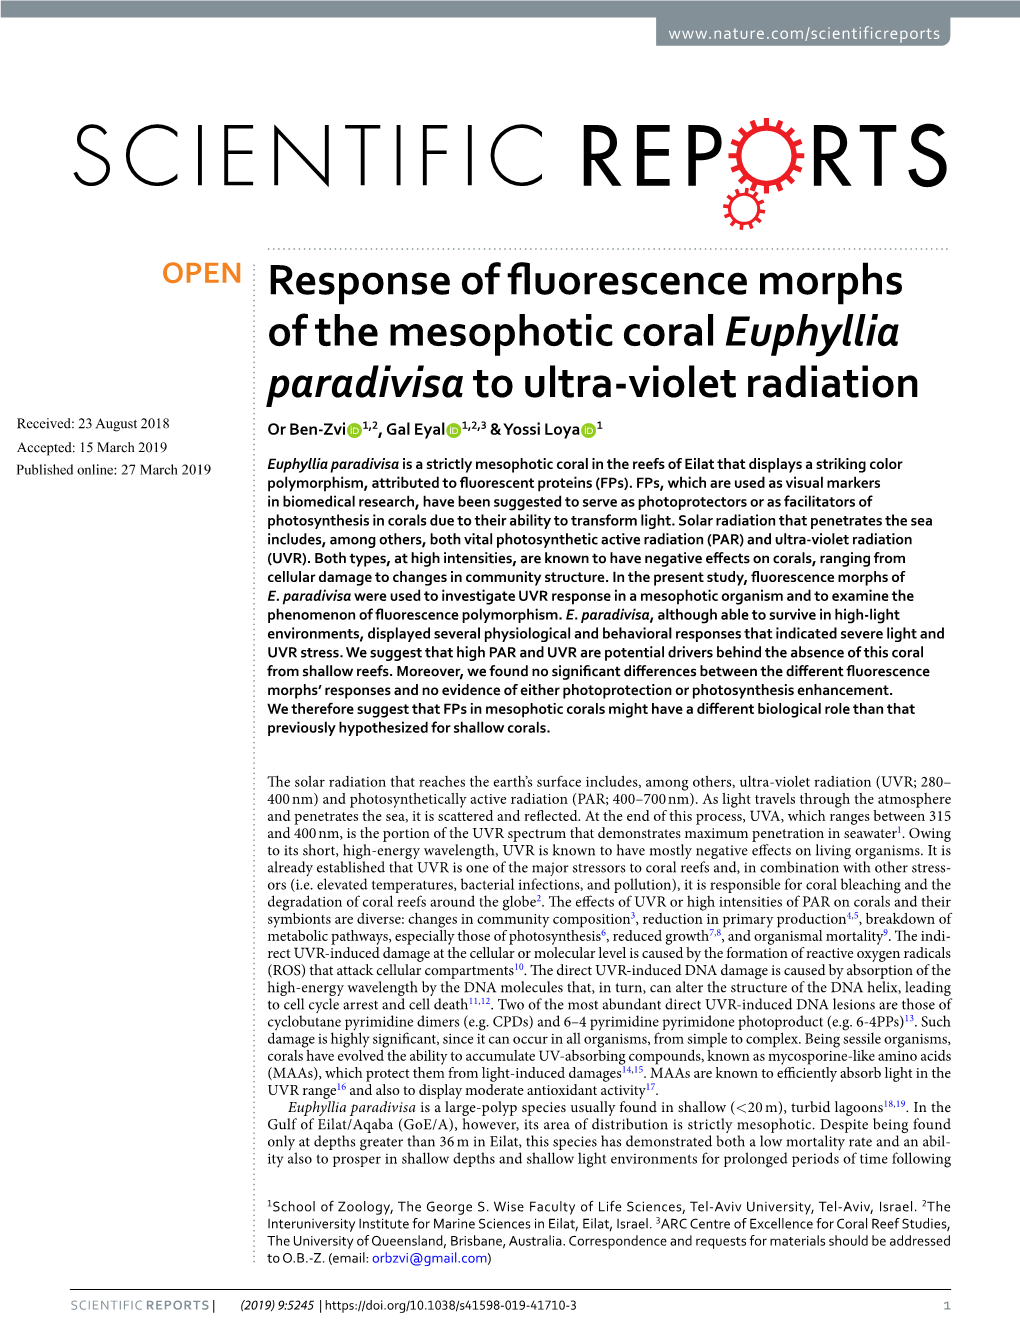 Response of Fluorescence Morphs of the Mesophotic Coral Euphyllia Paradivisa to Ultra-Violet Radiation